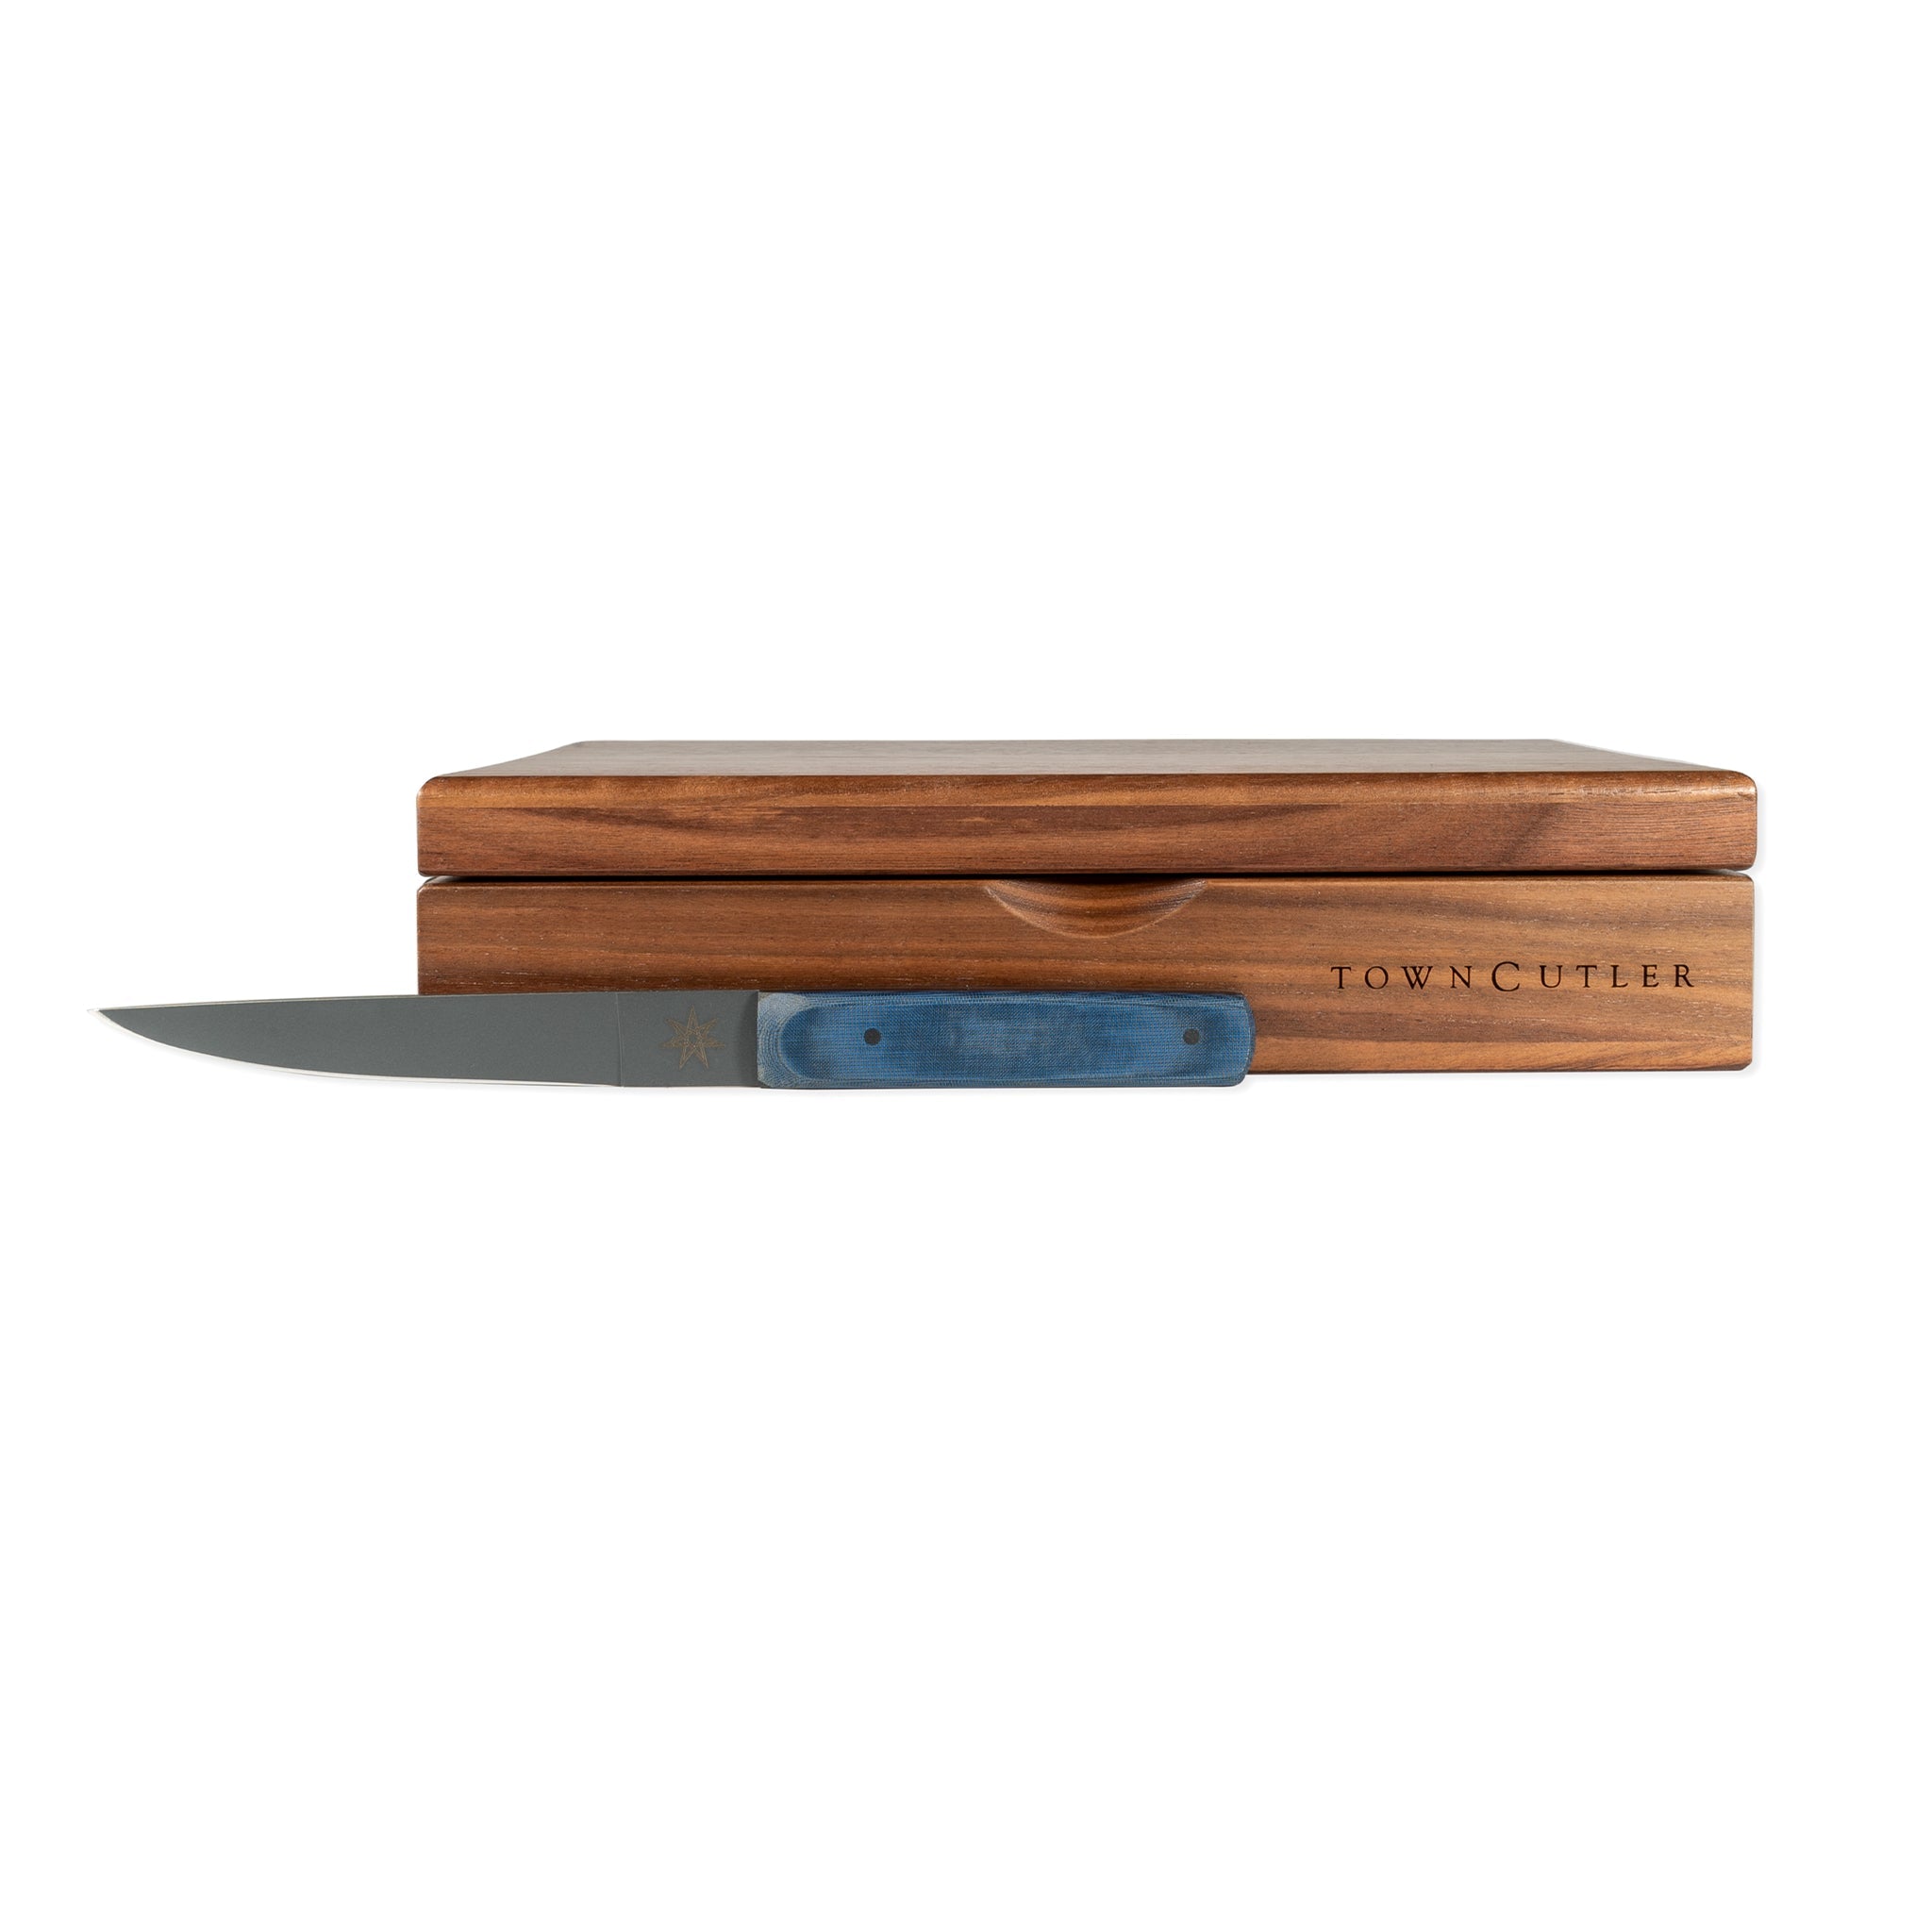 Town Cutler eXo Blue Steak Knife shown with Walnut storage box for set of four steak knives.